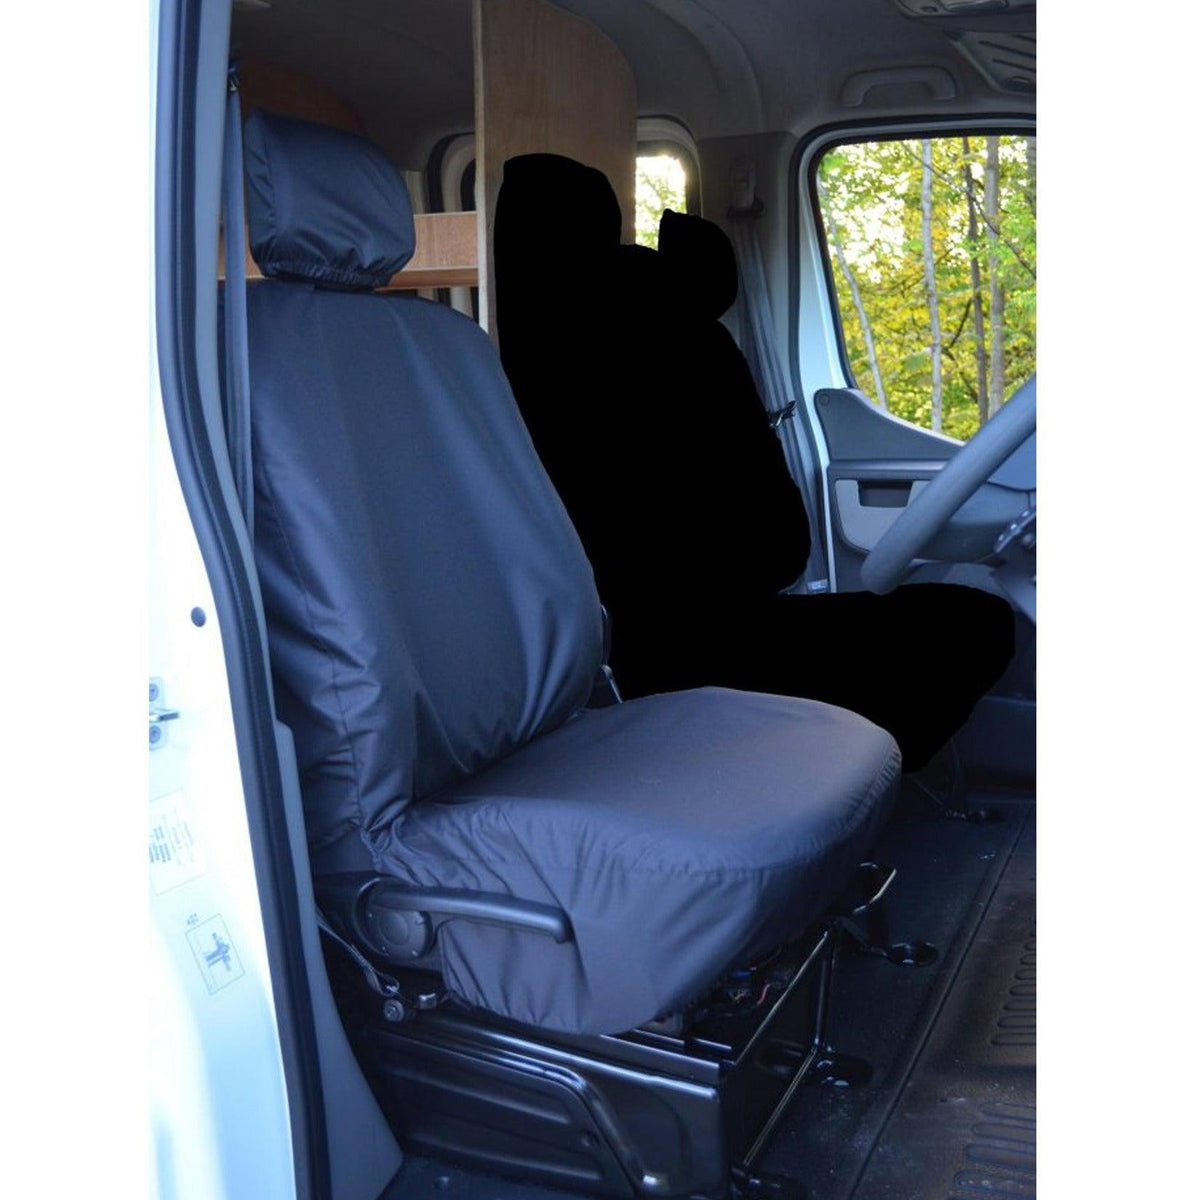 RENAULT MASTER VAN 2010 ON SINGLE DRIVER'S SEAT COVER - BLACK - Storm Xccessories2